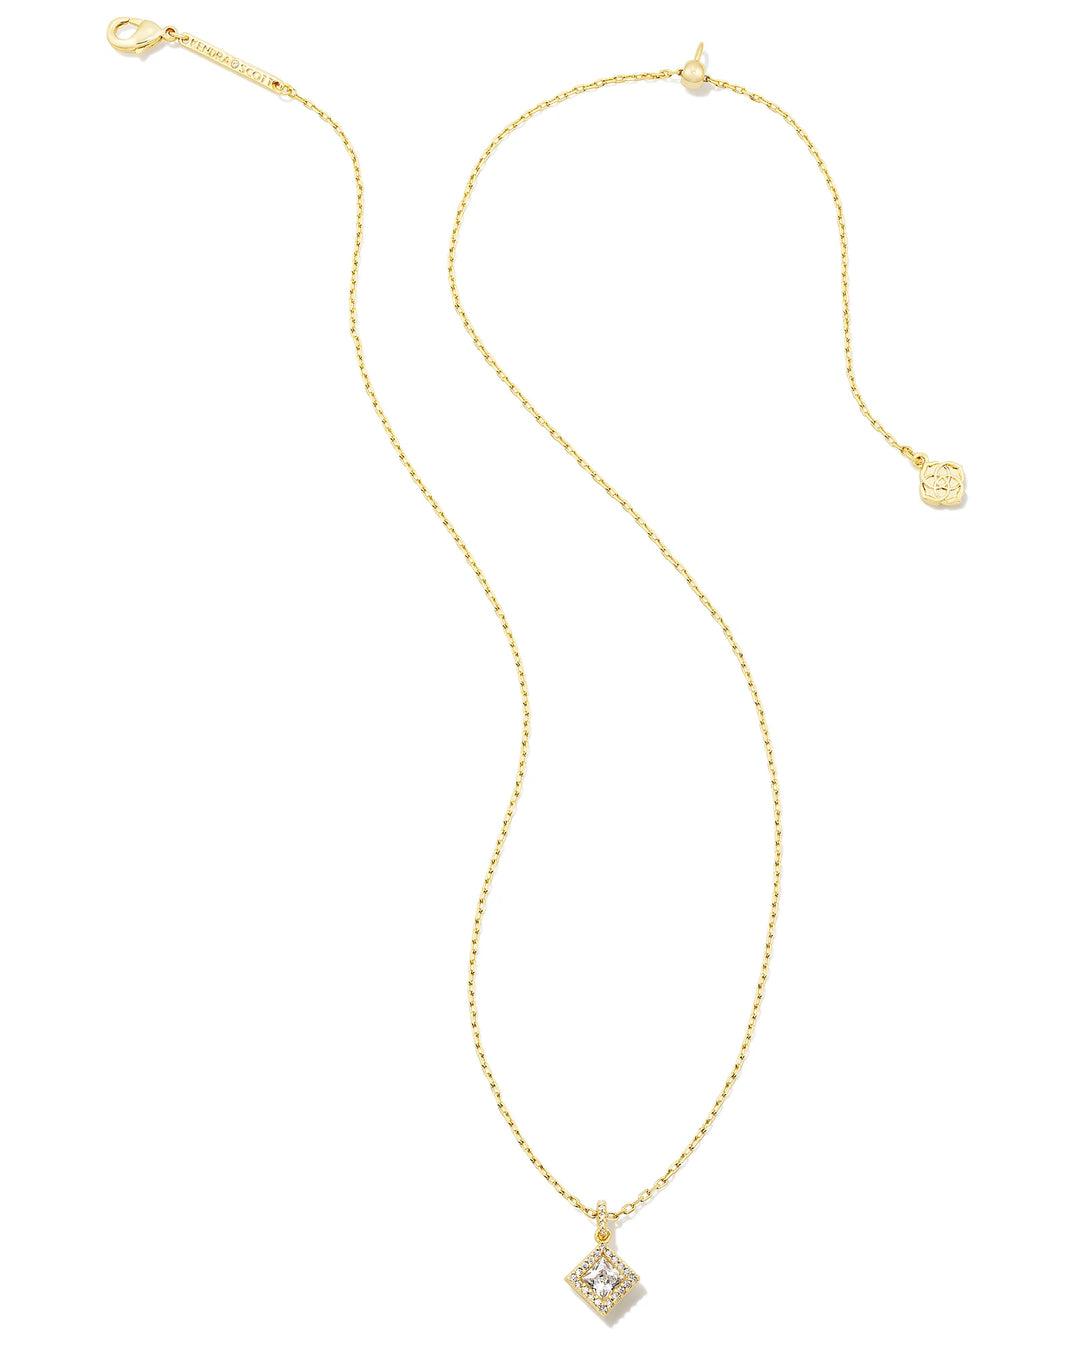 Kendra Scott Gracie Gold Short Pendant Necklace in White Crystal